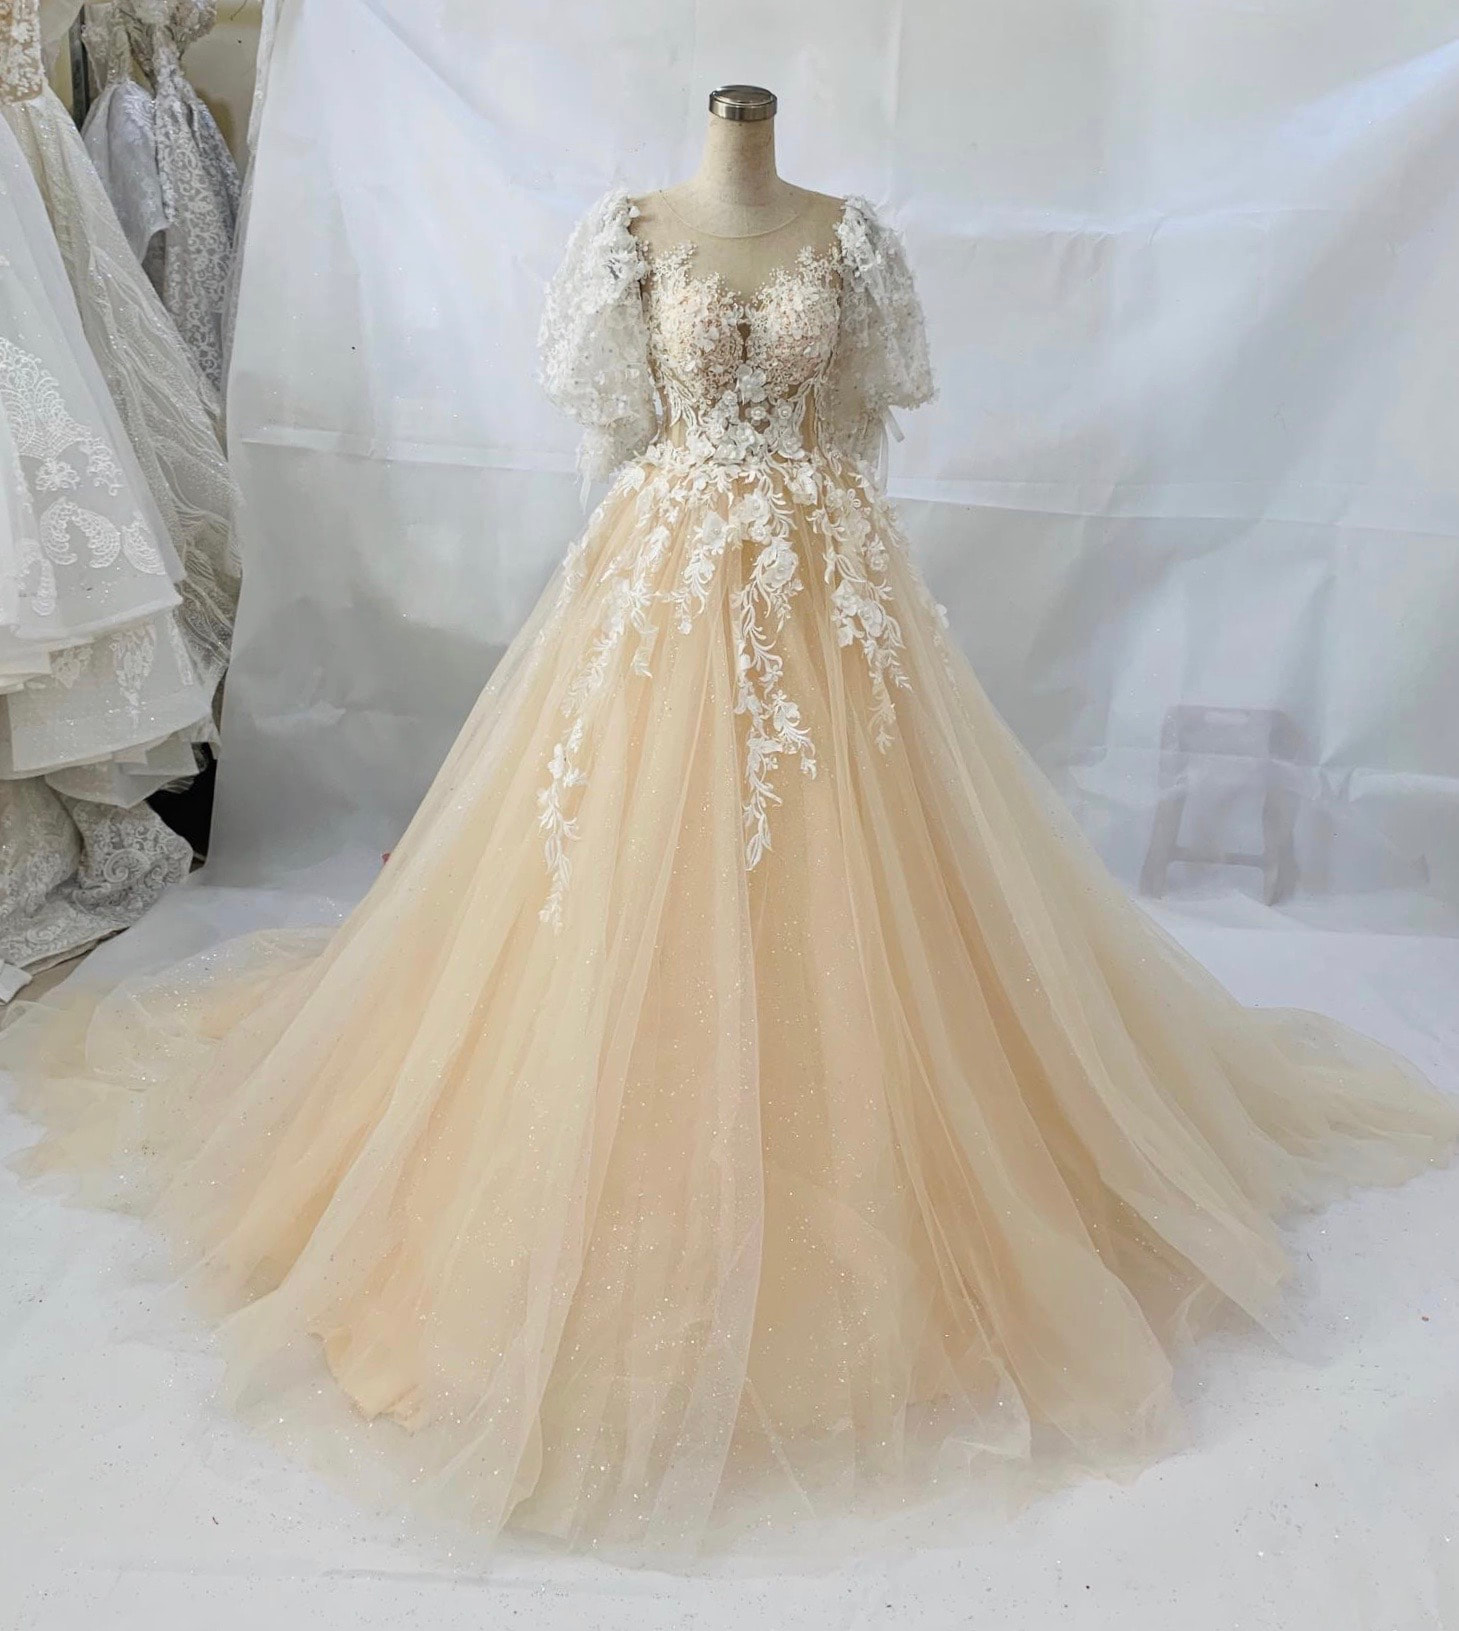 Various styles - Nude beige lace applique wedding dress with tulle skirt